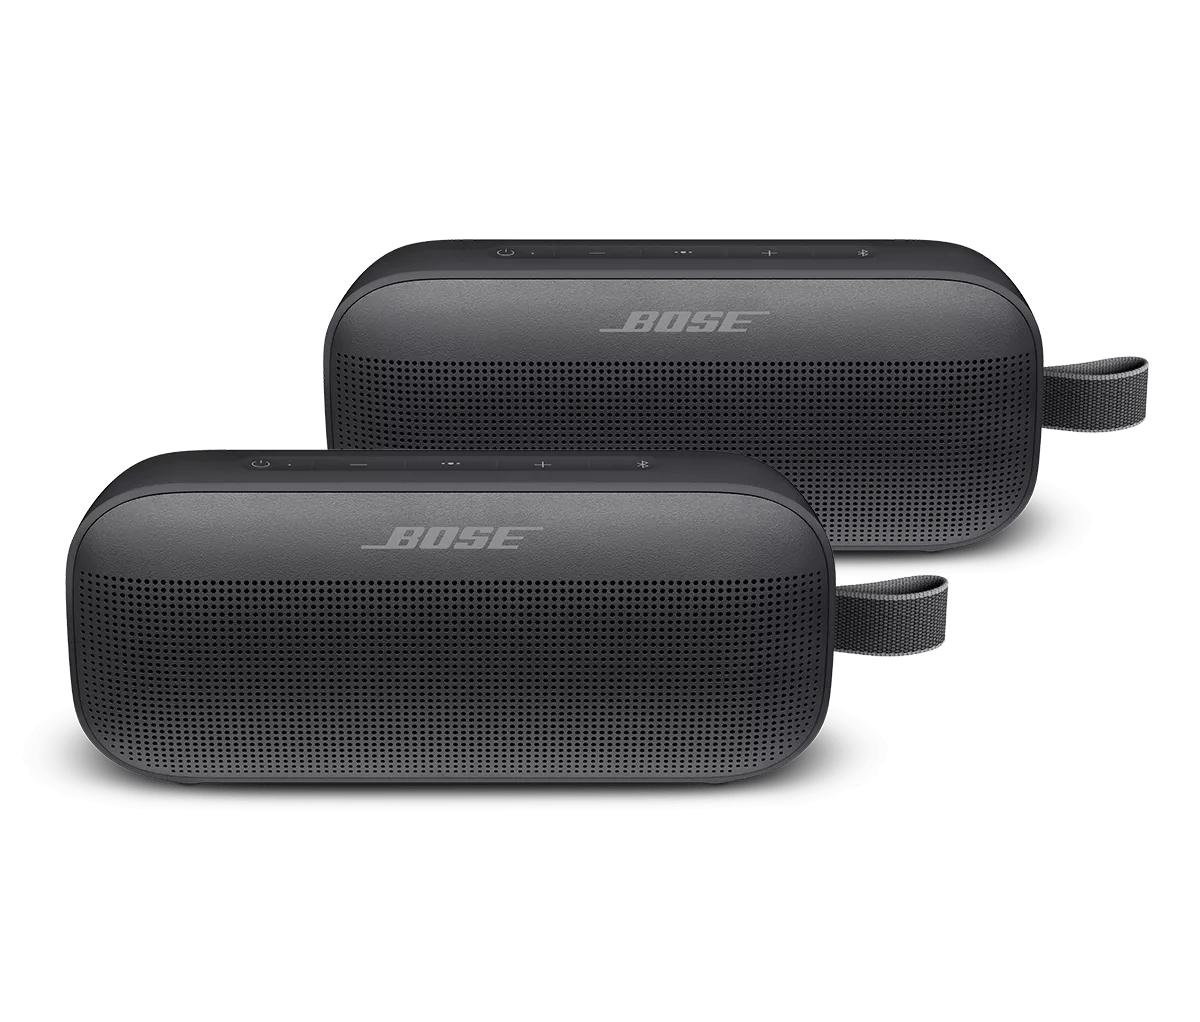 Best Type of Bluetooth Speakers for Your Promos